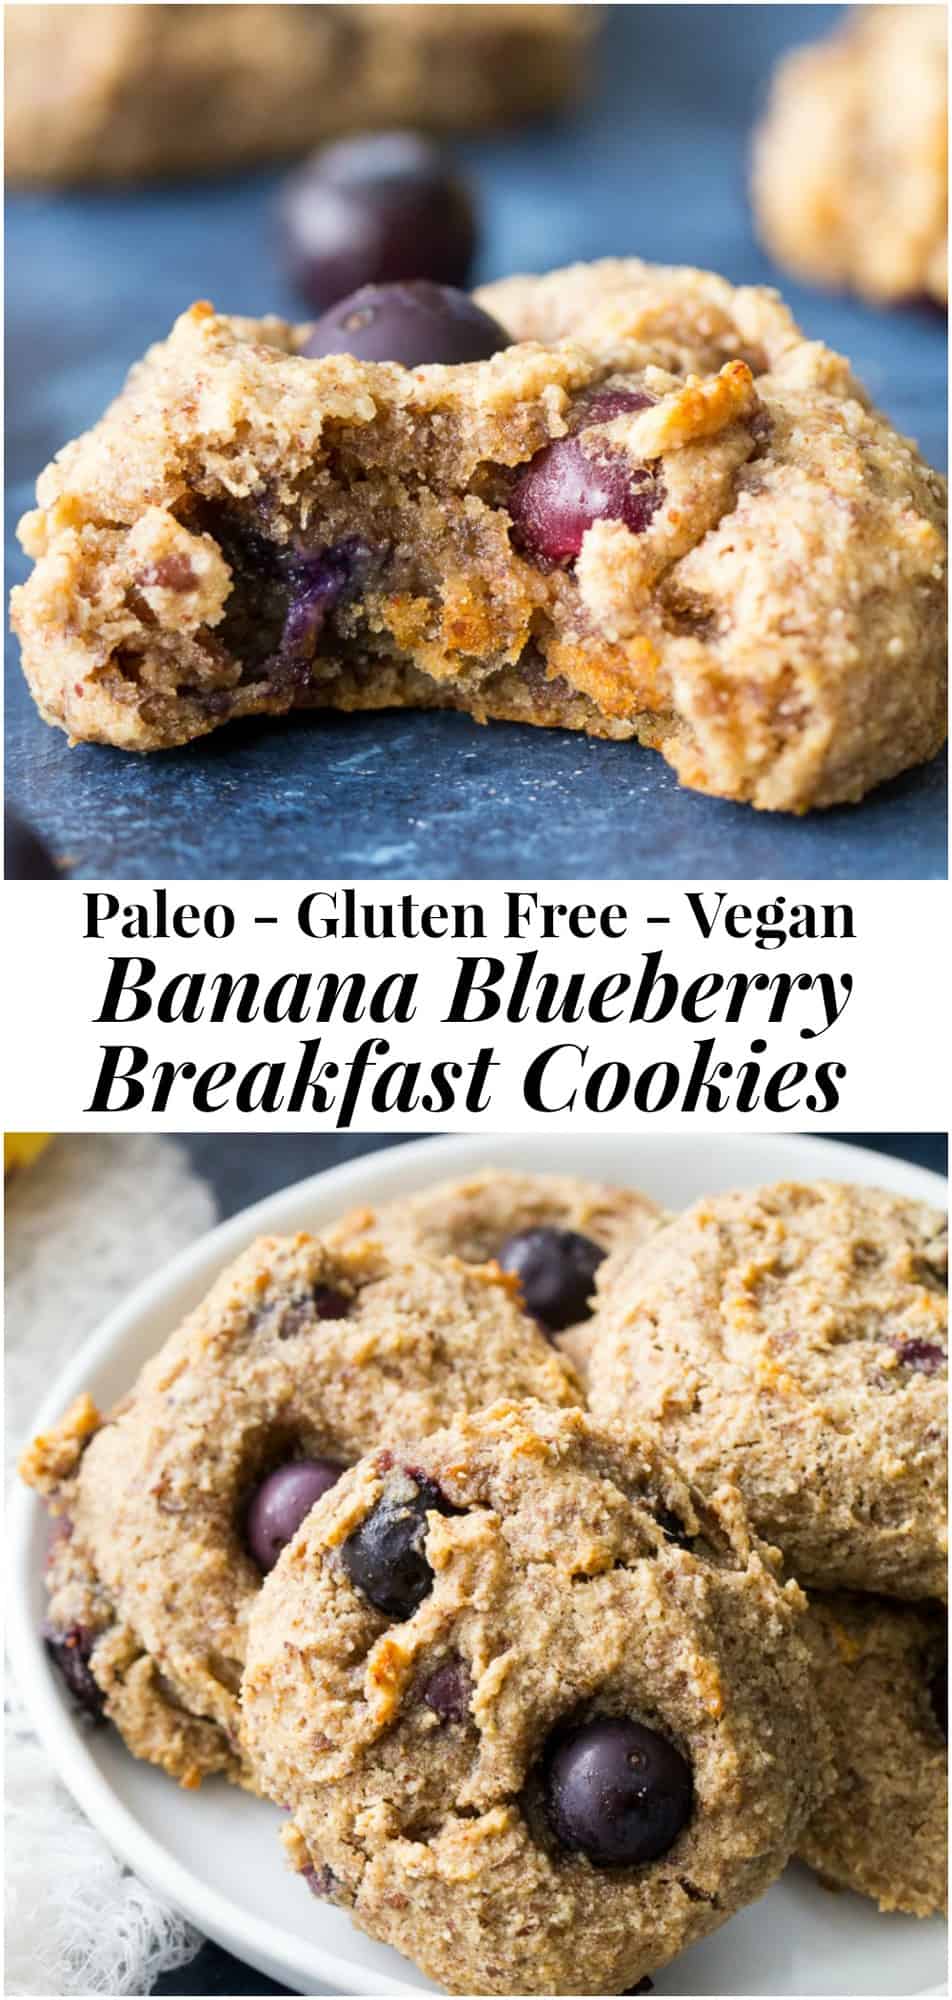 These banana blueberry breakfast cookies are perfectly chewy and irresistible with just the right amount of sweetness!  Perfect to go with breakfast or as an afternoon snack.  They're gluten free, grain free, vegan and Paleo friendly. #glutenfree #vegan #paleo